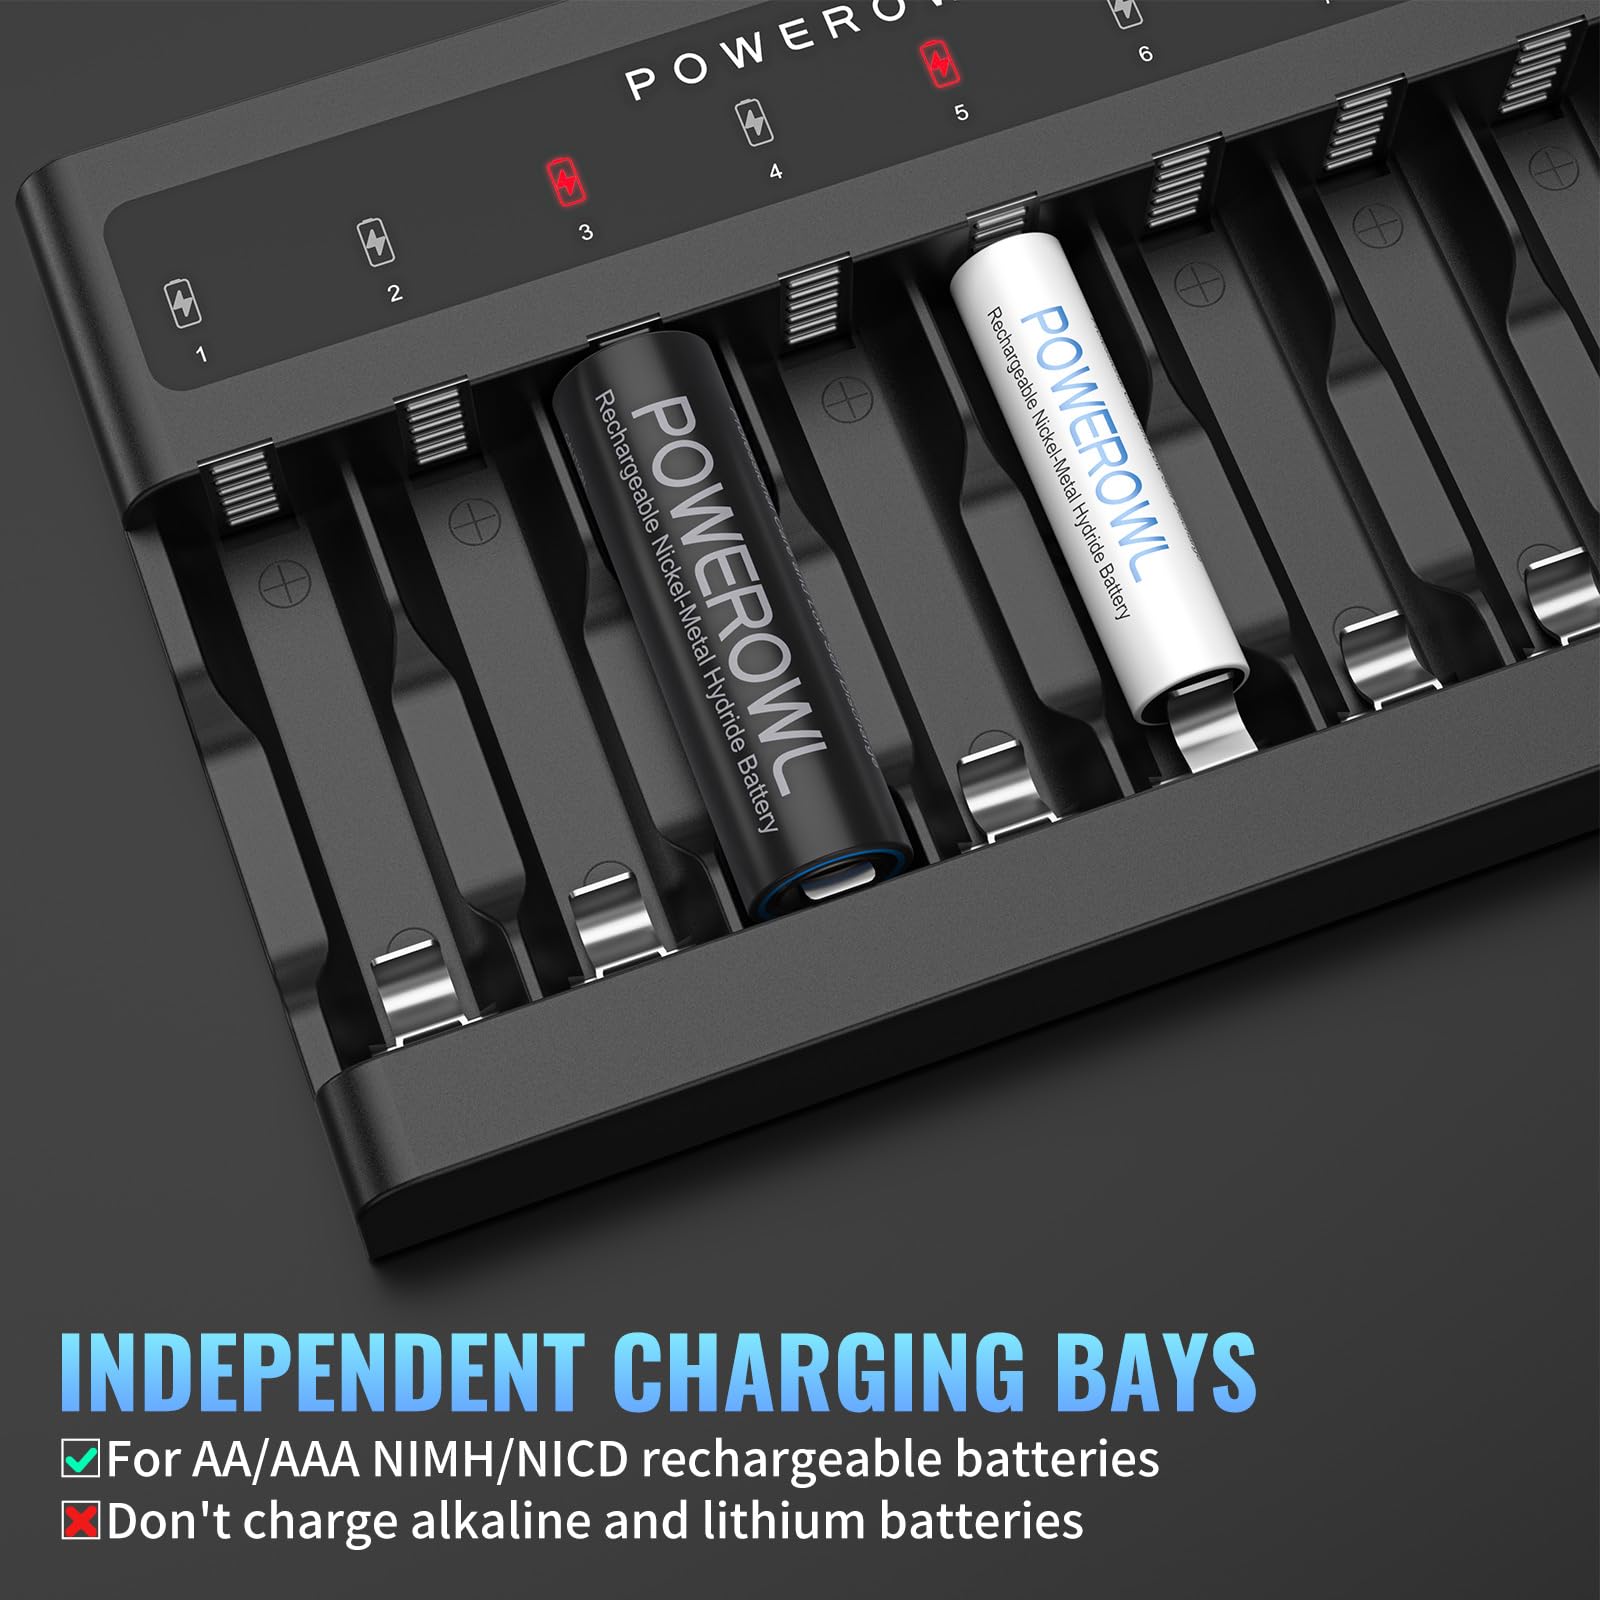 1000mAh Rechargeable AAA Batteries with Smart 8 Bay Battery Charger, Low Self Discharge Ni-MH Triple A Batteries, 8 Count